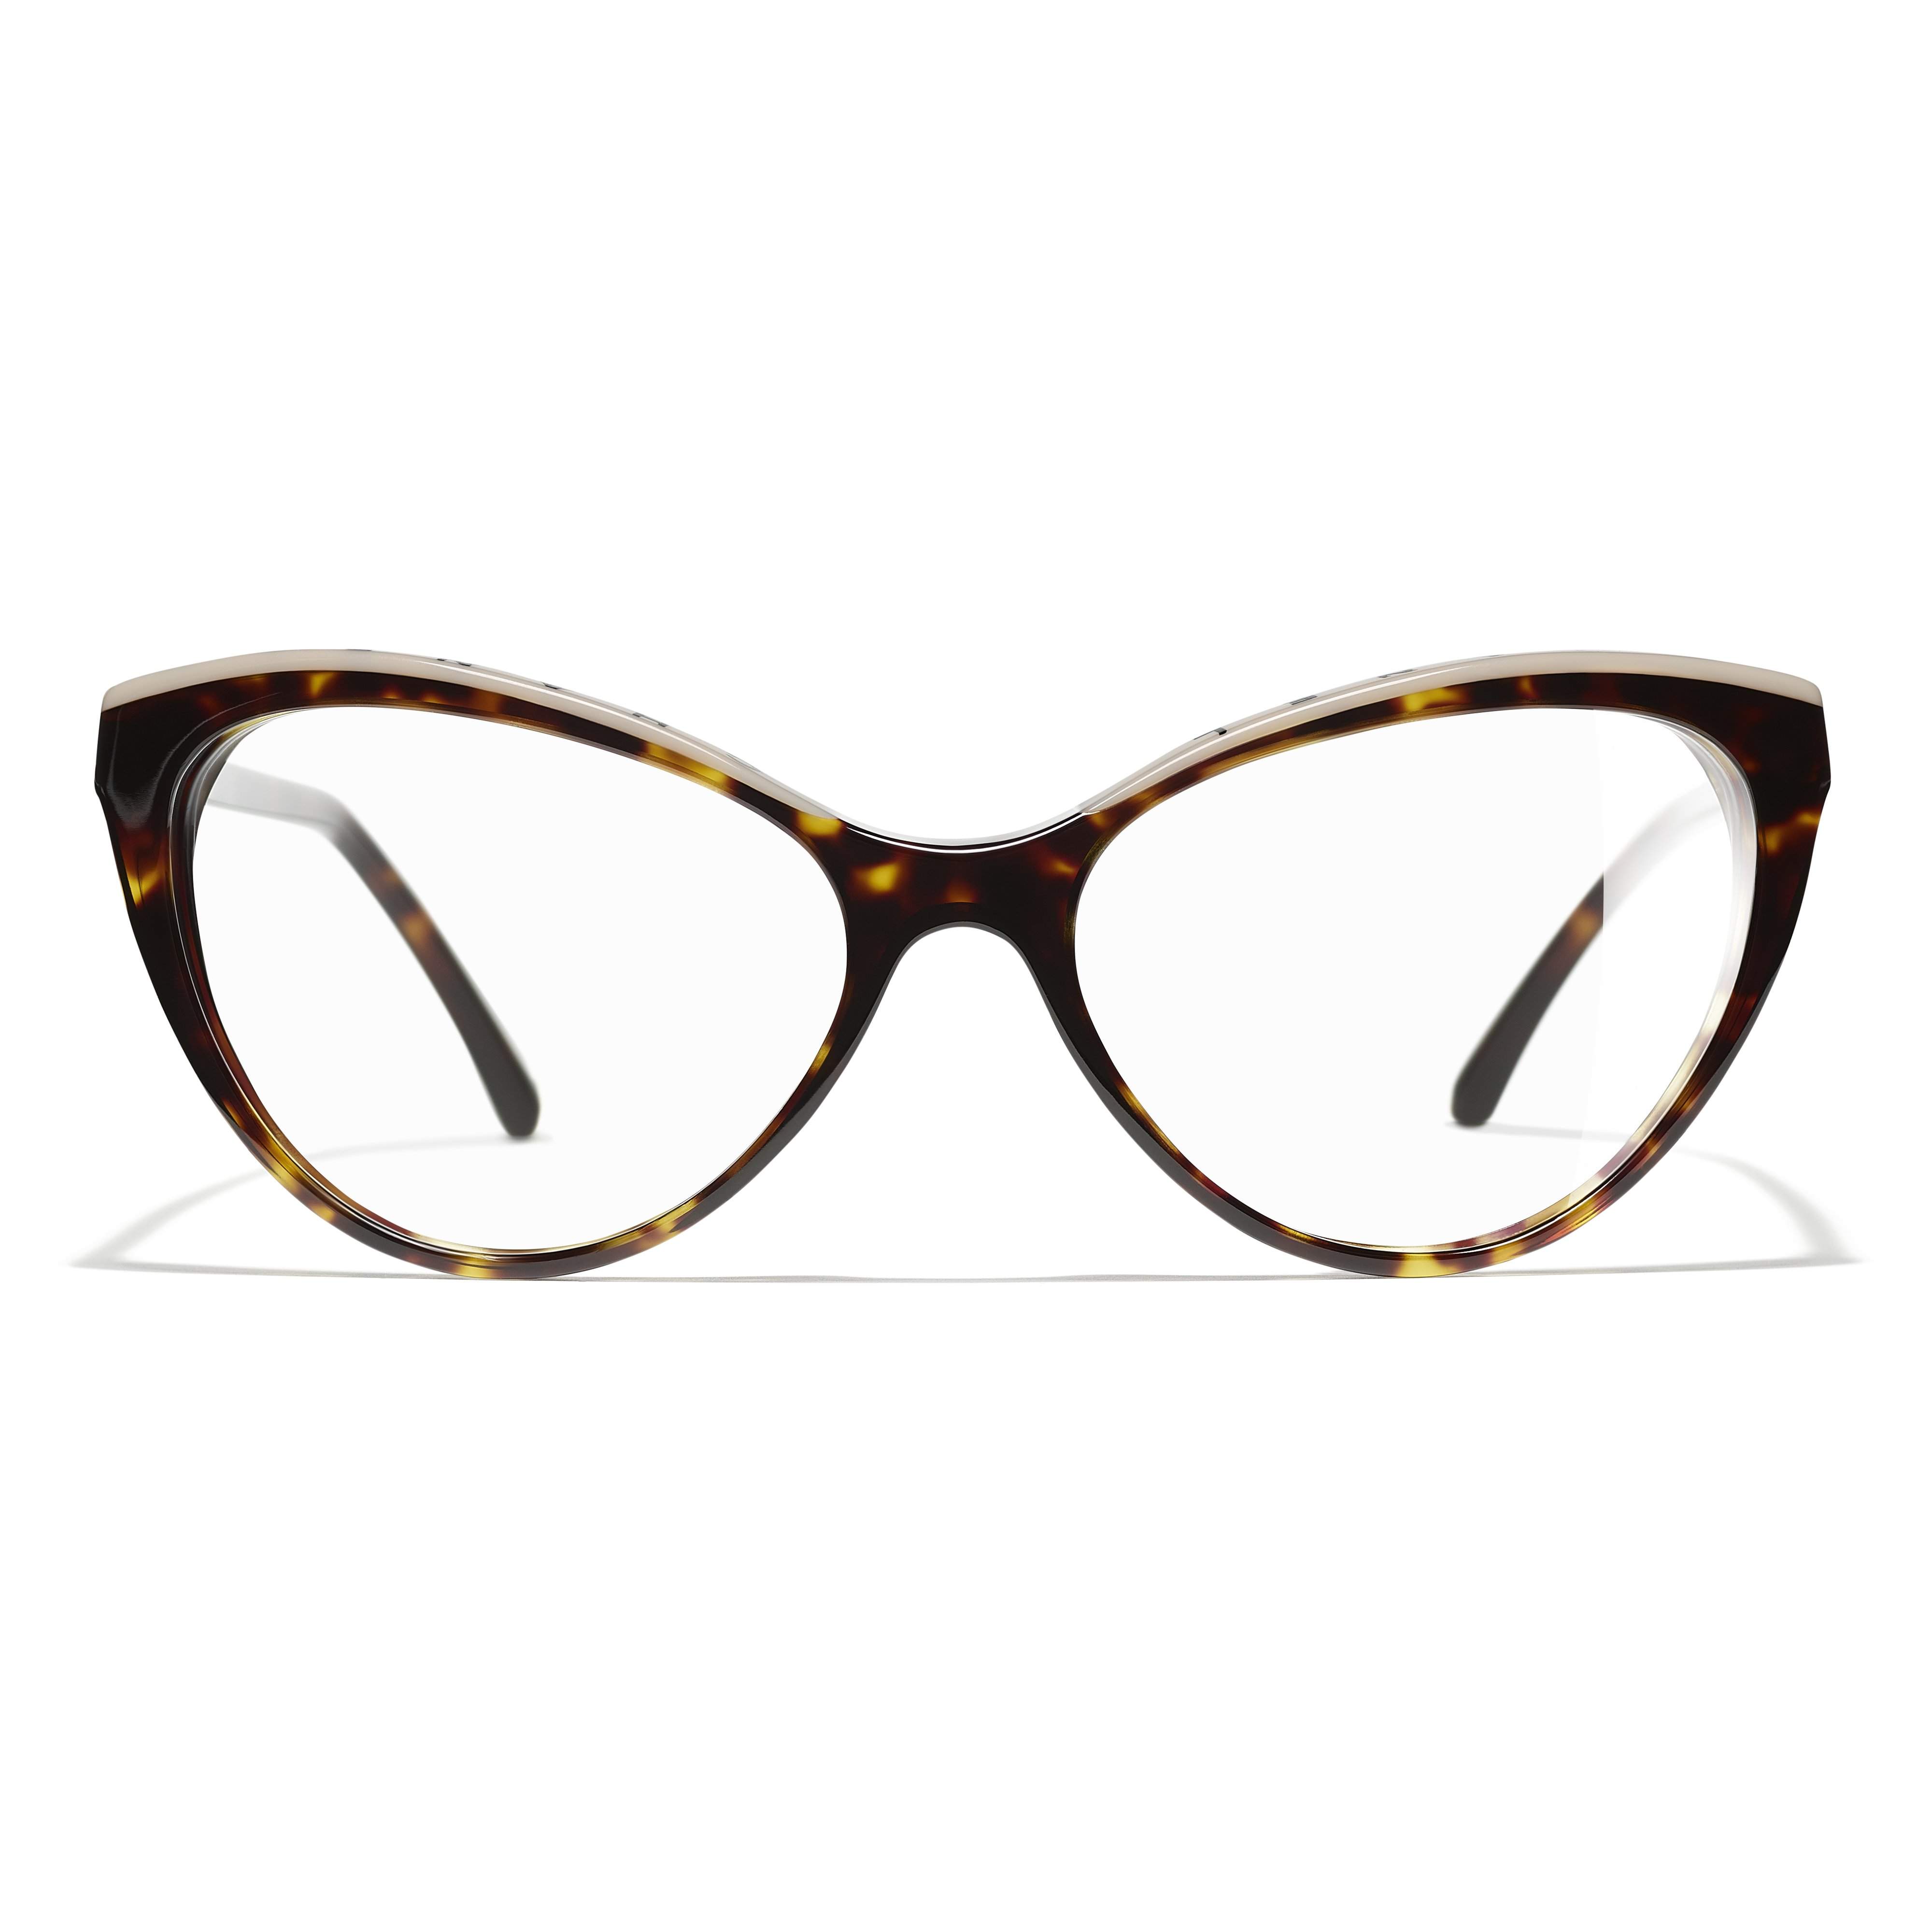 Eyeglasses Chanel CH3393 1682 52-16 Ecaille in stock, Price 212,50 €